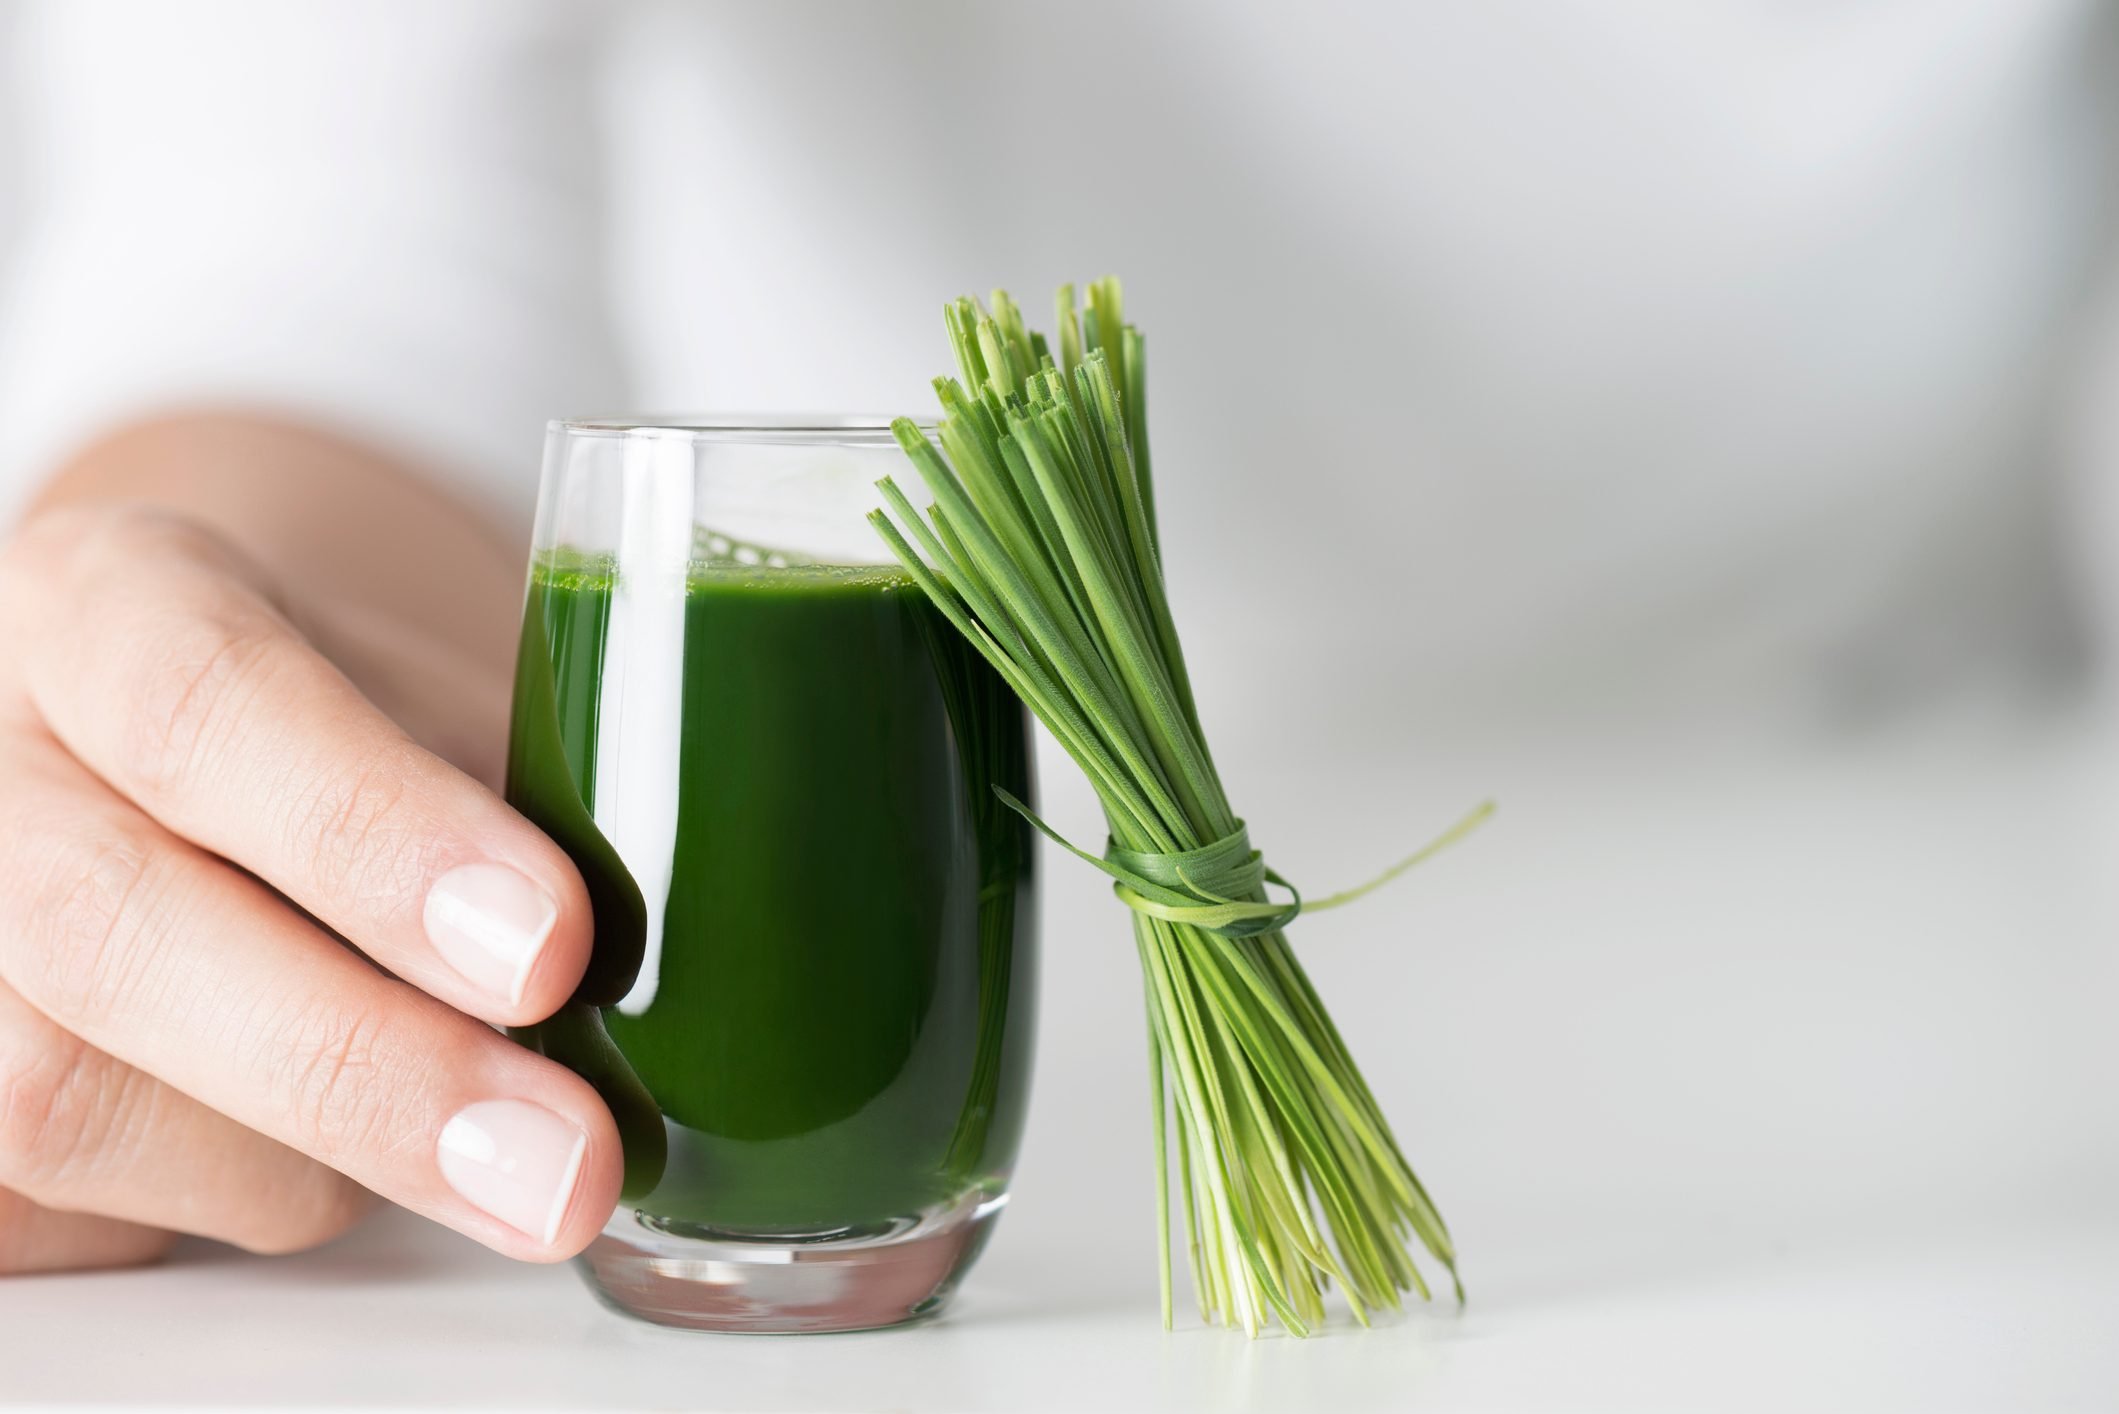 Is Wheatgrass Worth Trying? 8 Potential Benefits to Consider